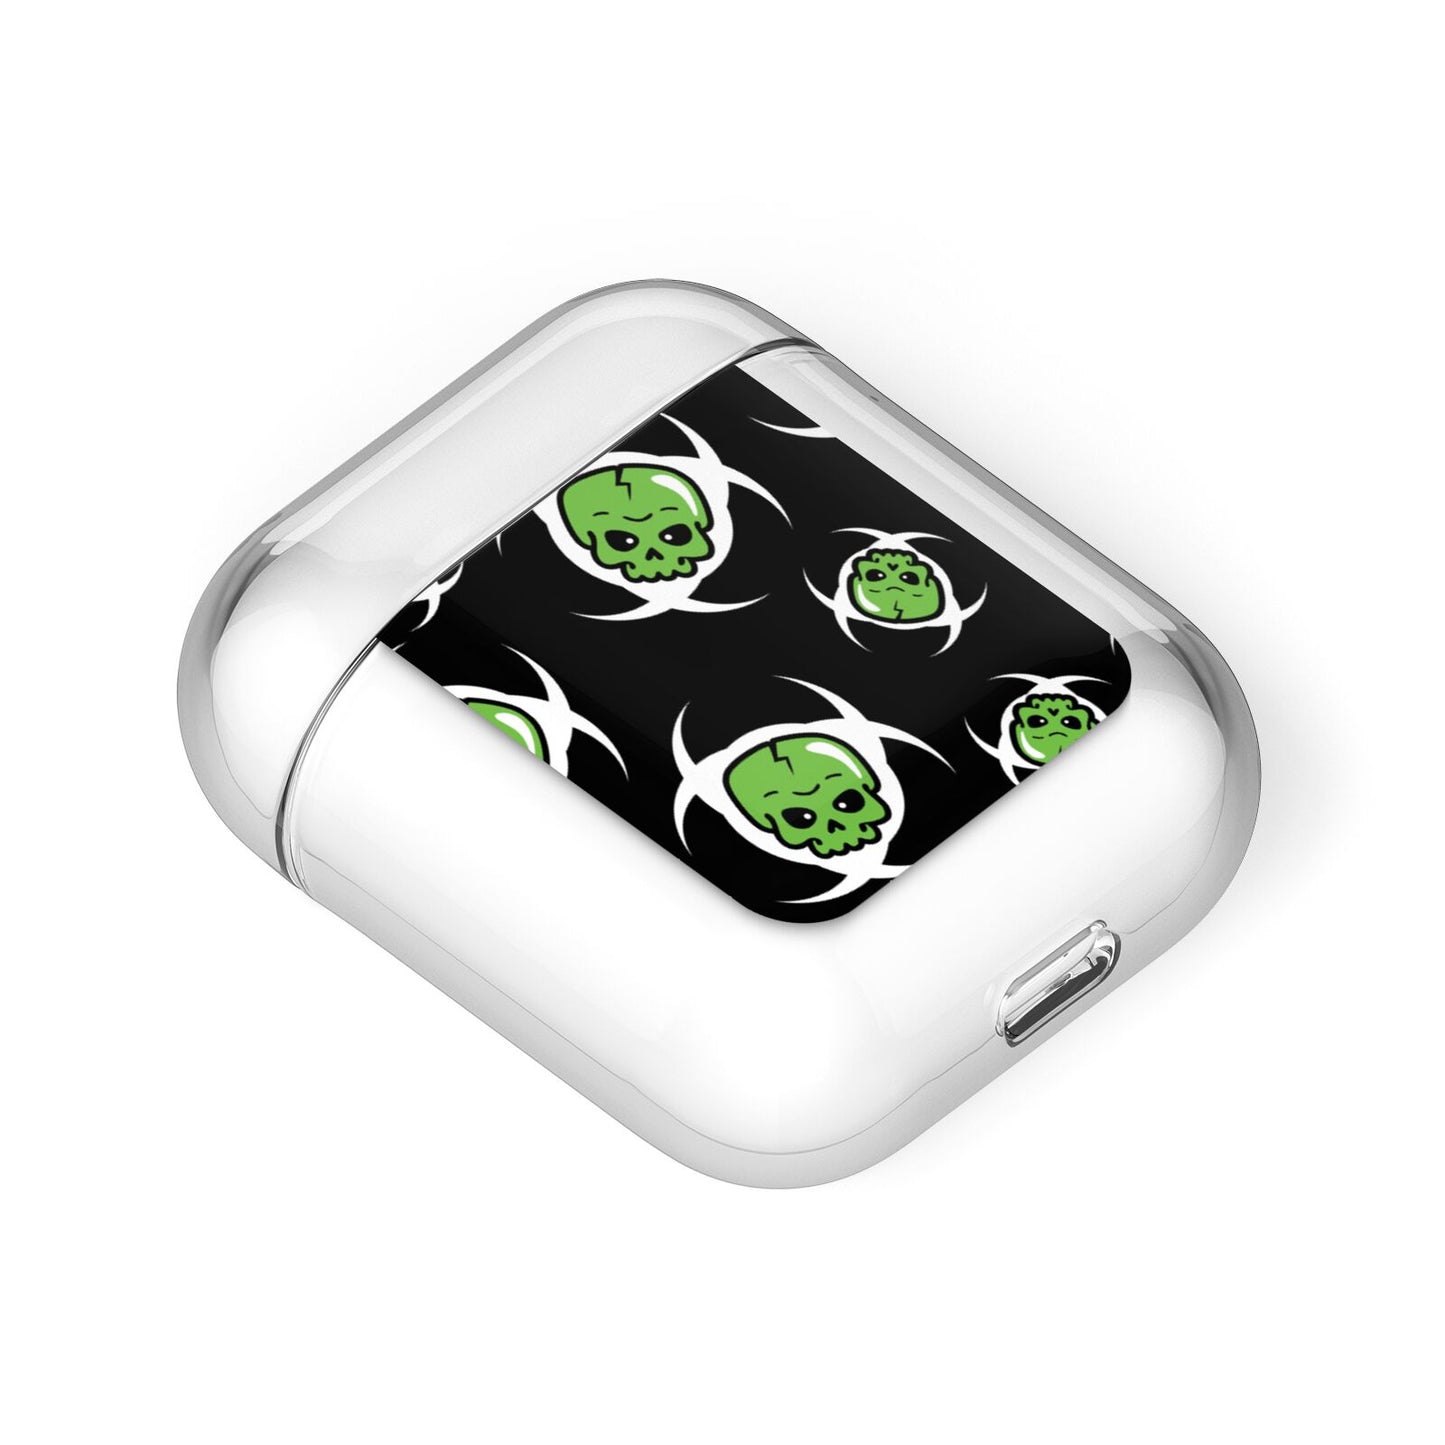 Toxic Skulls AirPods Case Laid Flat